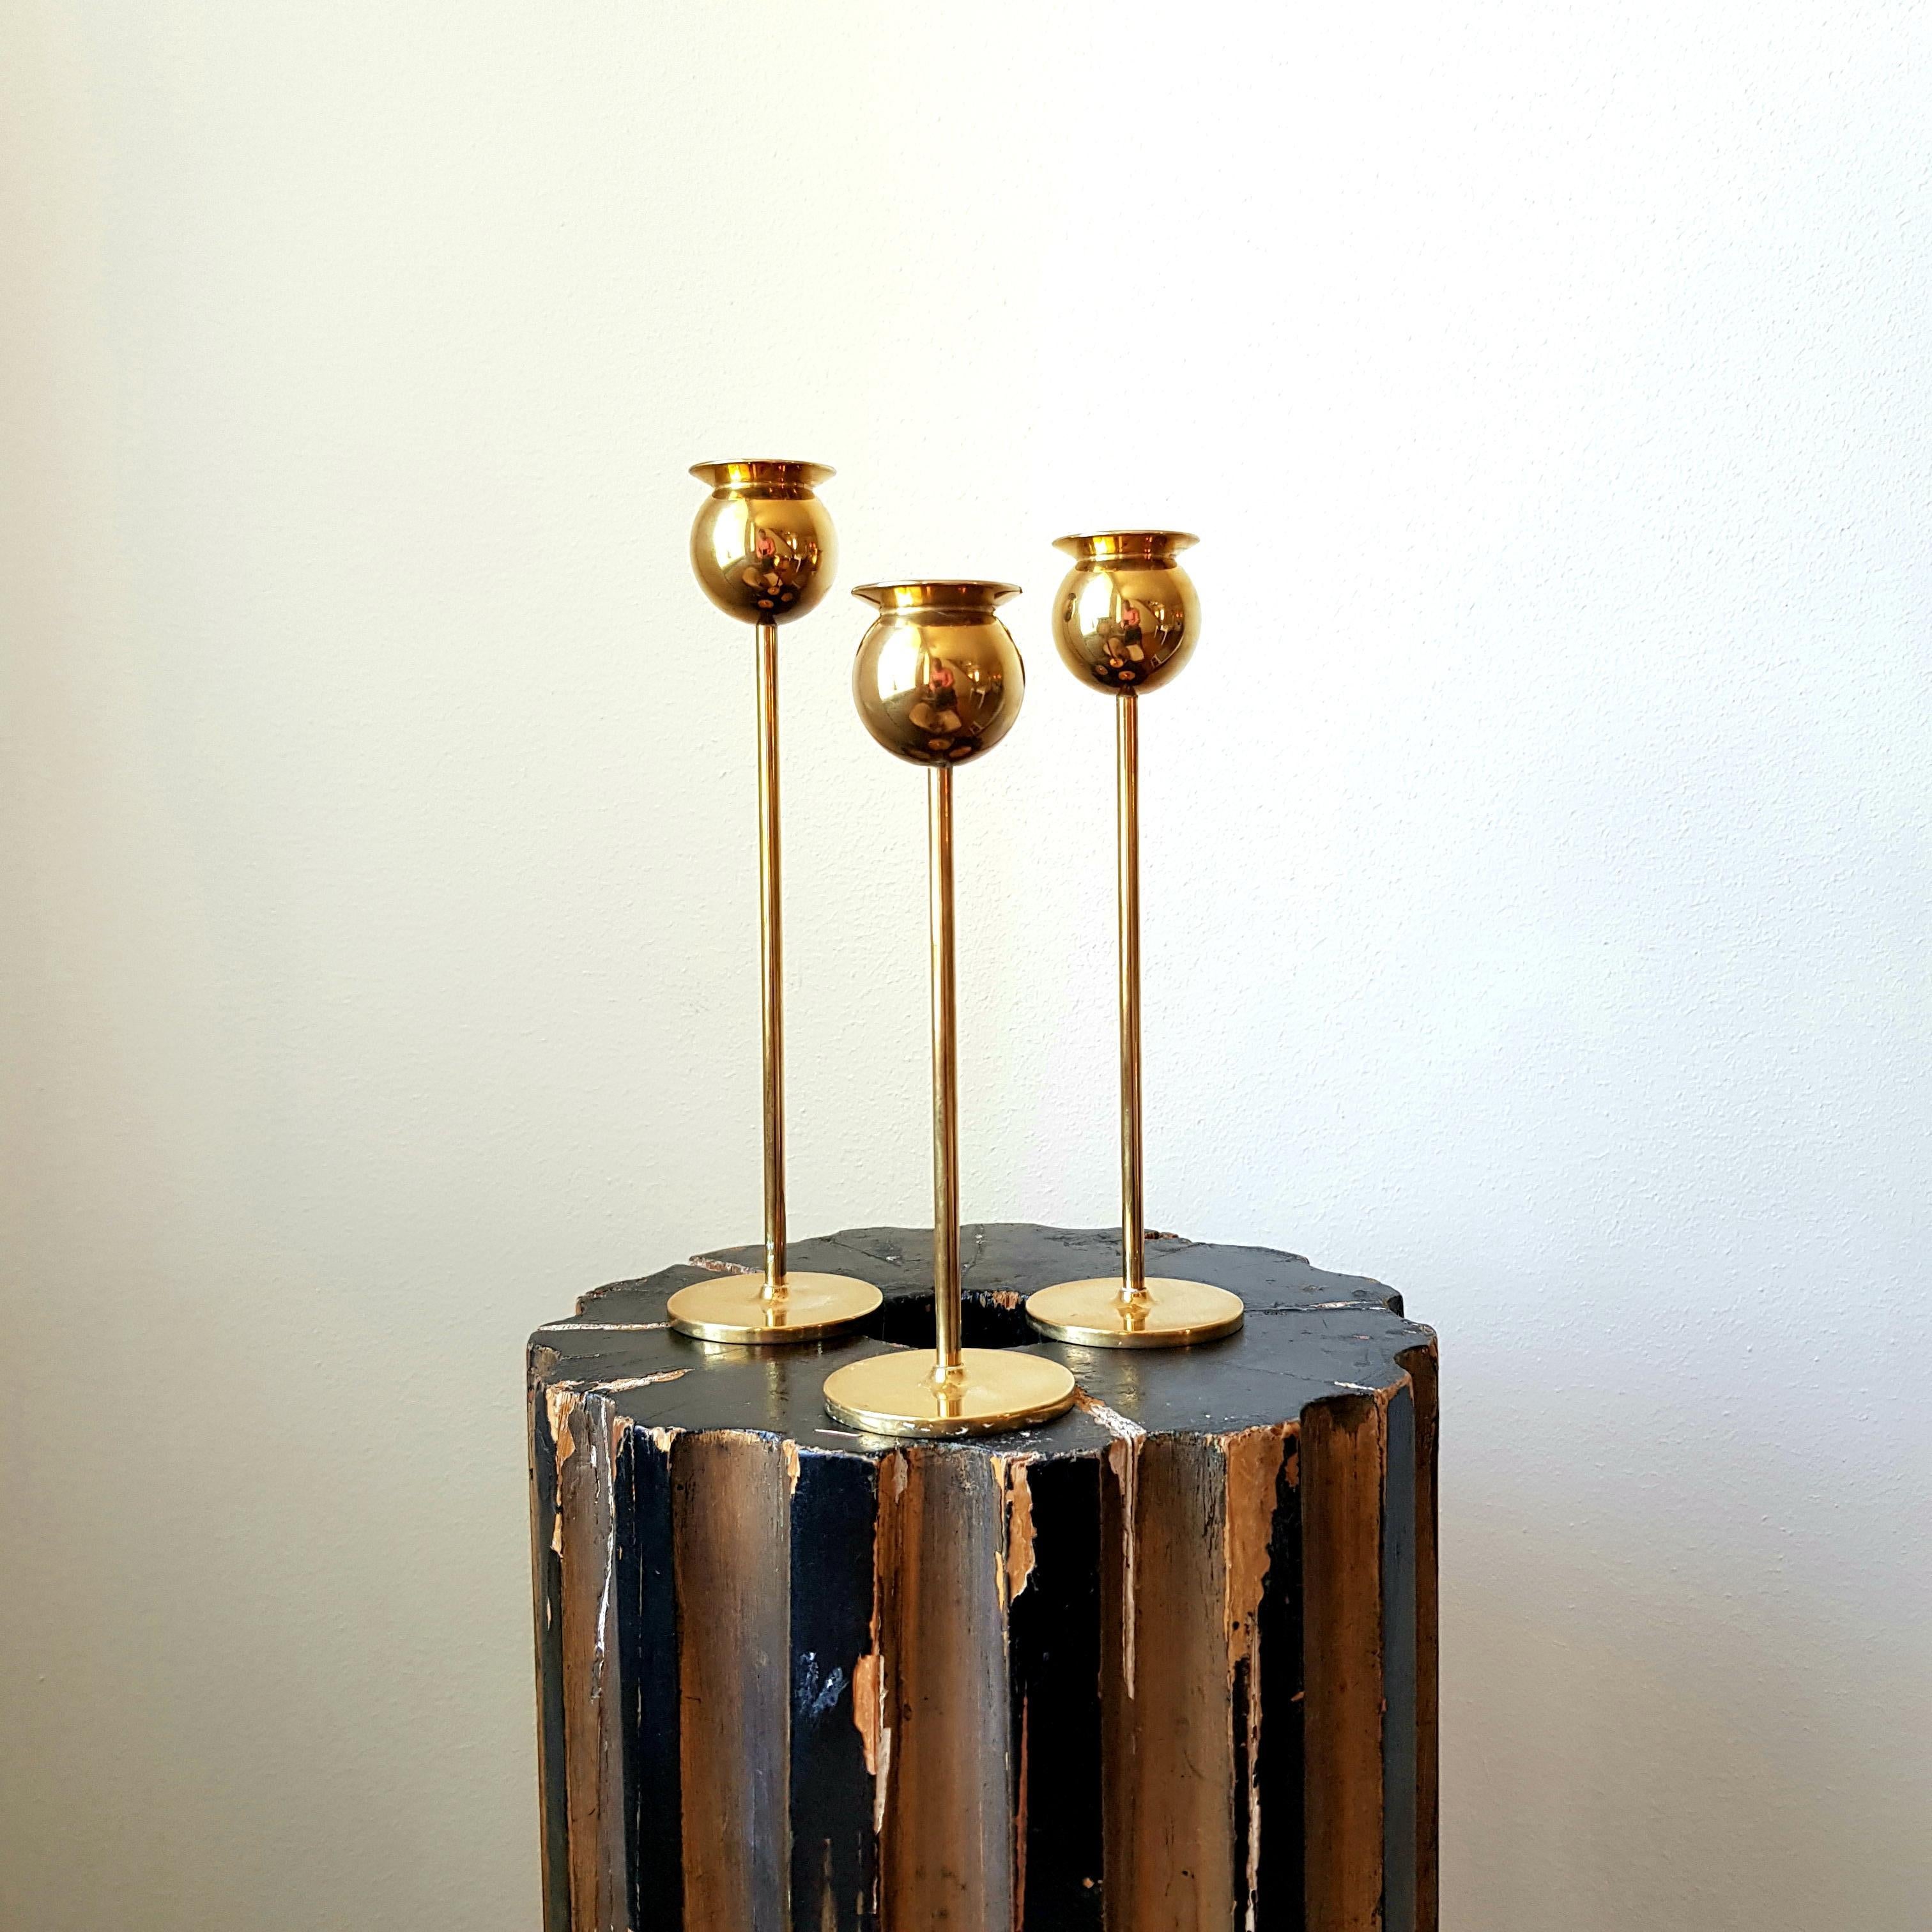 A set of three “Tulip” candlesticks by Pierre Forsell for Skultuna Bruk, Sweden.  The set was manufactured during Forsell’s tenure at Skultuna. Each piece is stamped at the base along with the “F”, which shows that the piece was made during his time